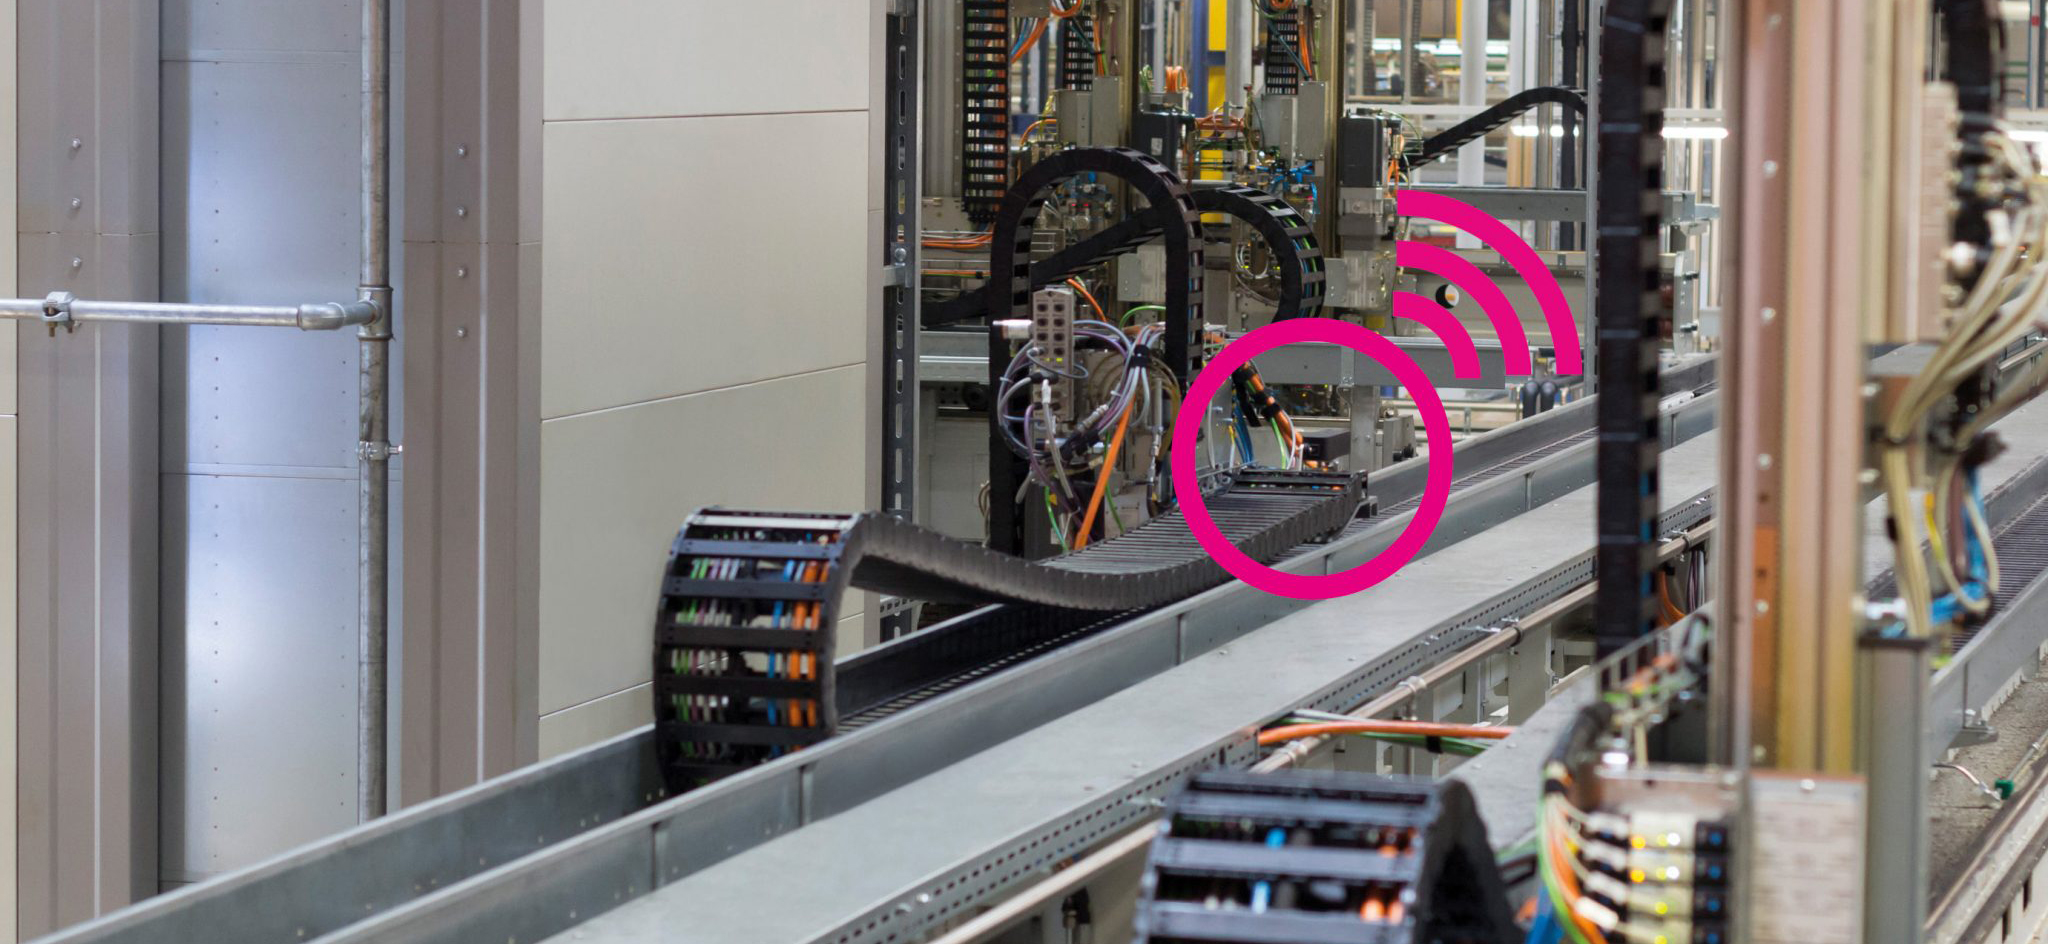 Smart e-chain cable carriers using predictive maintenance in a factory for engine production